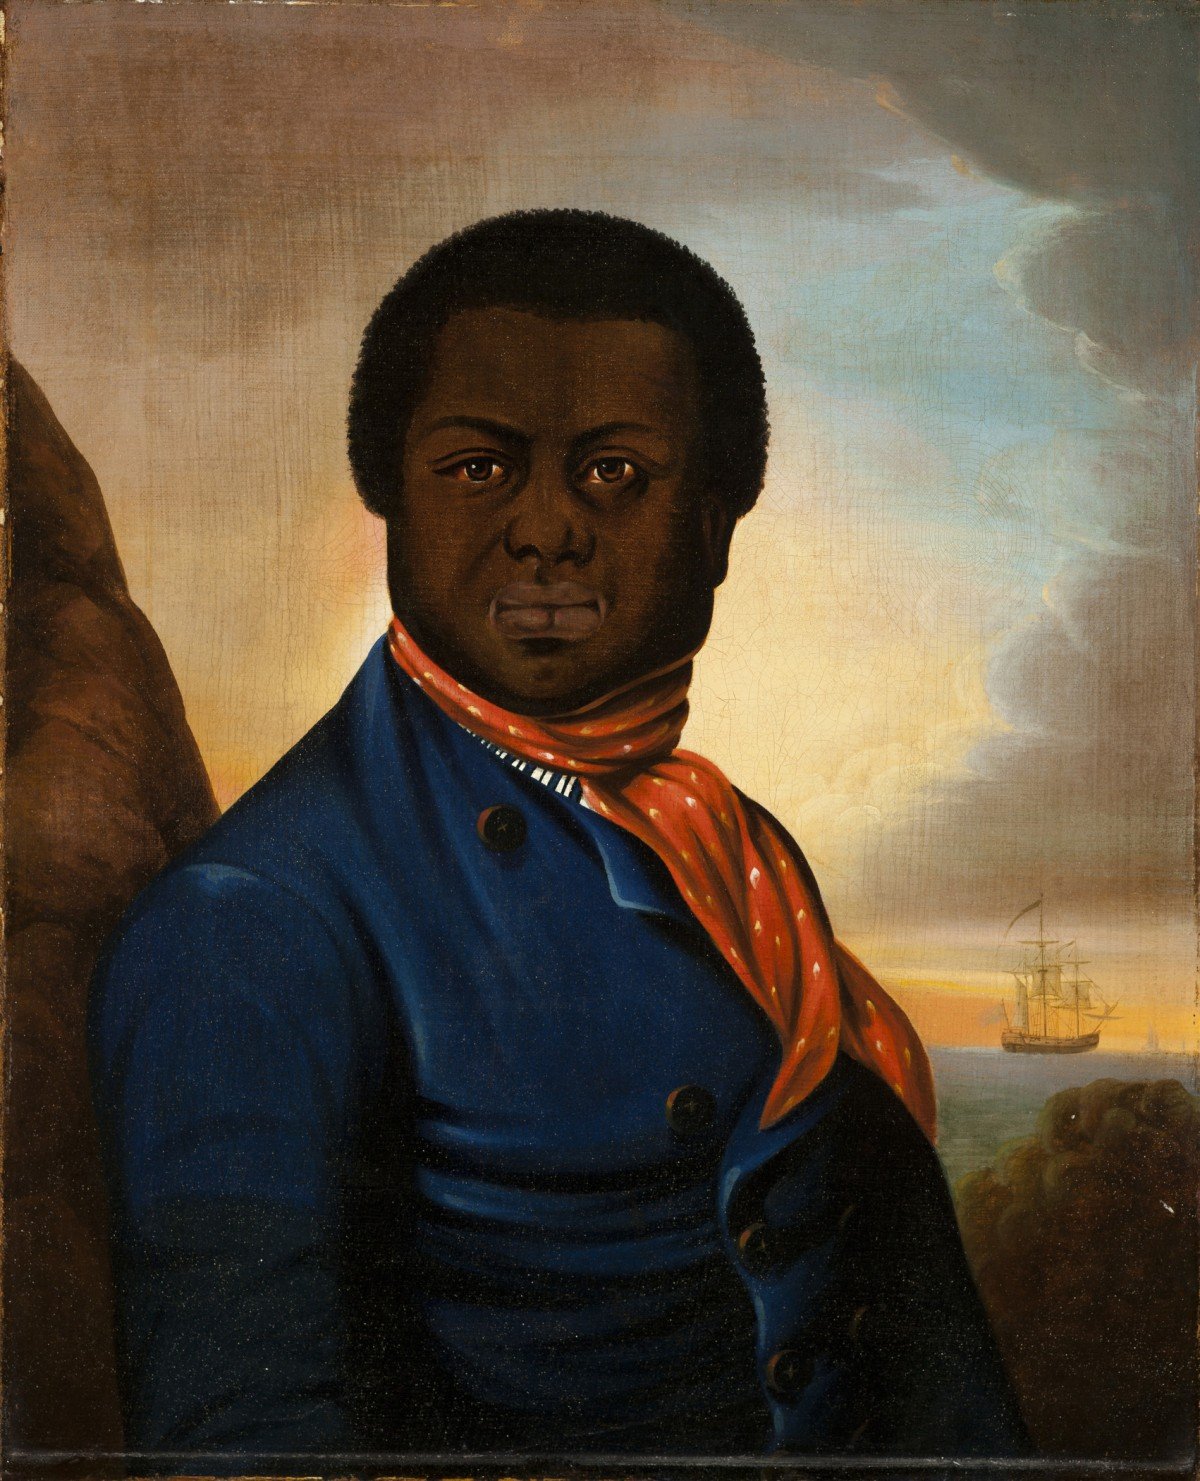 Portrait of a Sailor (Paul Cuffe?), ca. 1800. Collection of the Los Angeles County Museum of Art, purchased with funds provided by Cecile Bartman. Photo ©Museum Associates/LACMA.